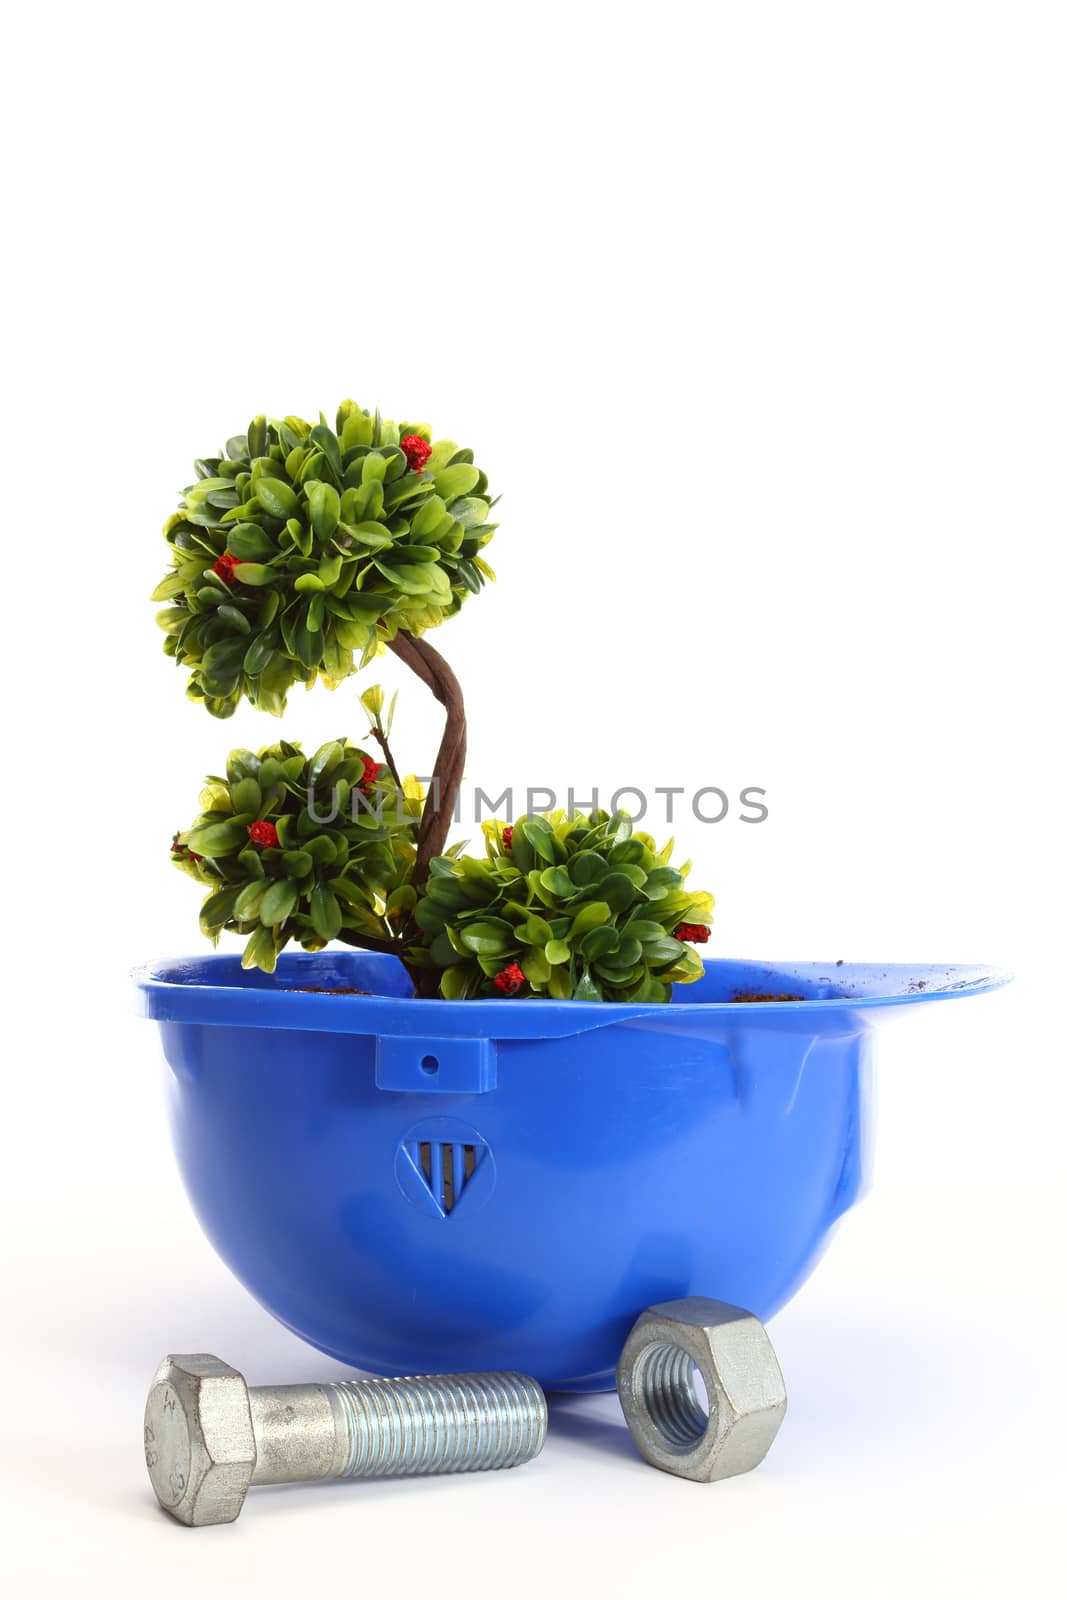 Green plant in blue helmet on white - environmental friendly industry concept